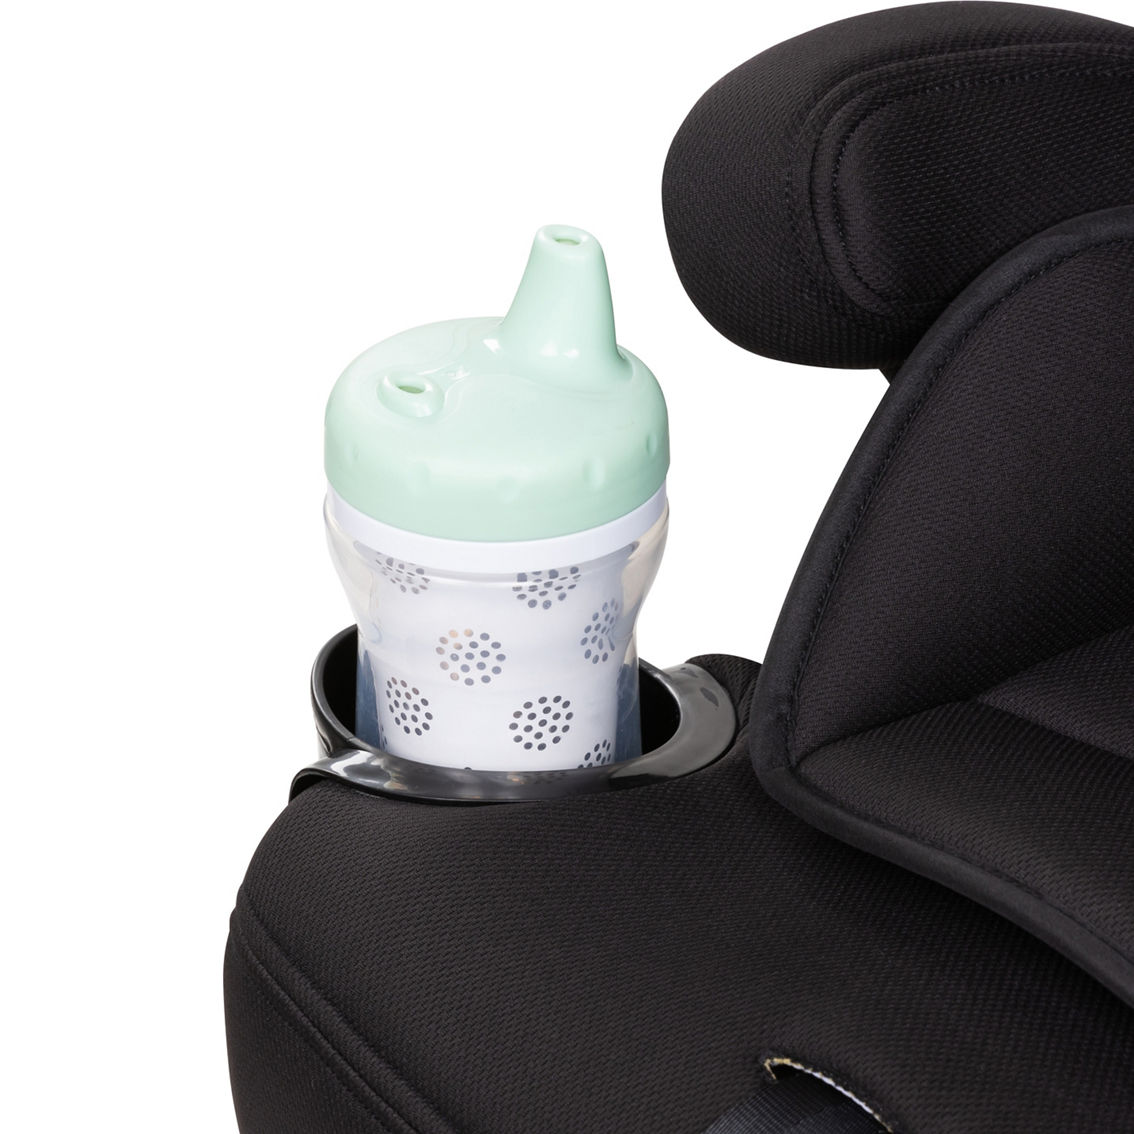 Baby Trend Hybrid 3-in-1 Combination Booster Car Seat - Image 4 of 5